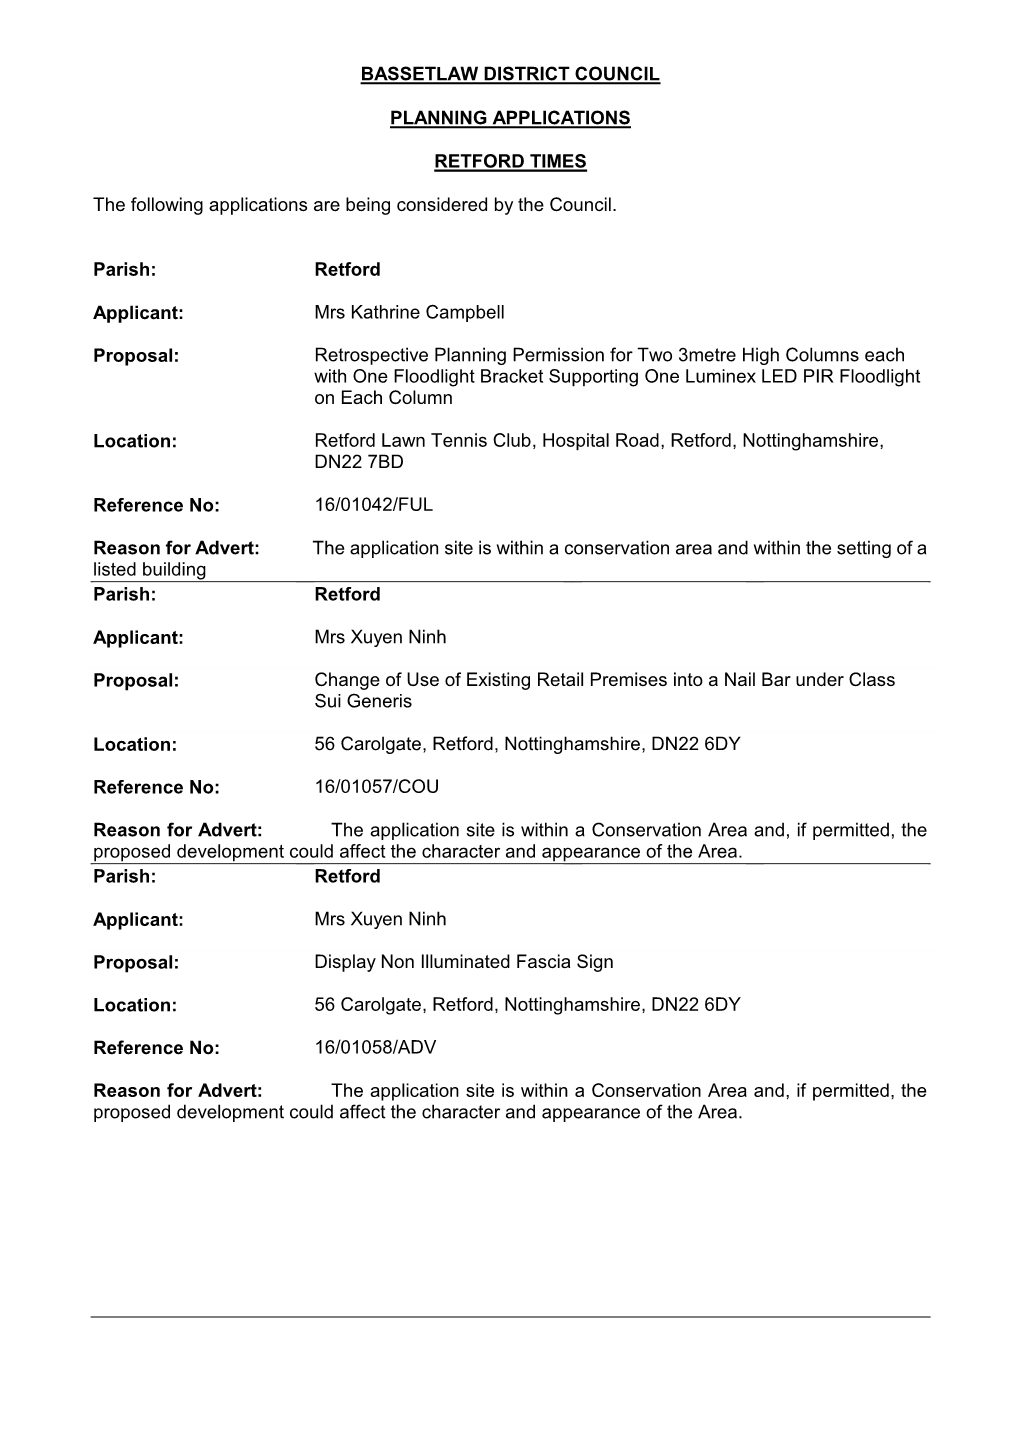 Bassetlaw District Council Planning Applications